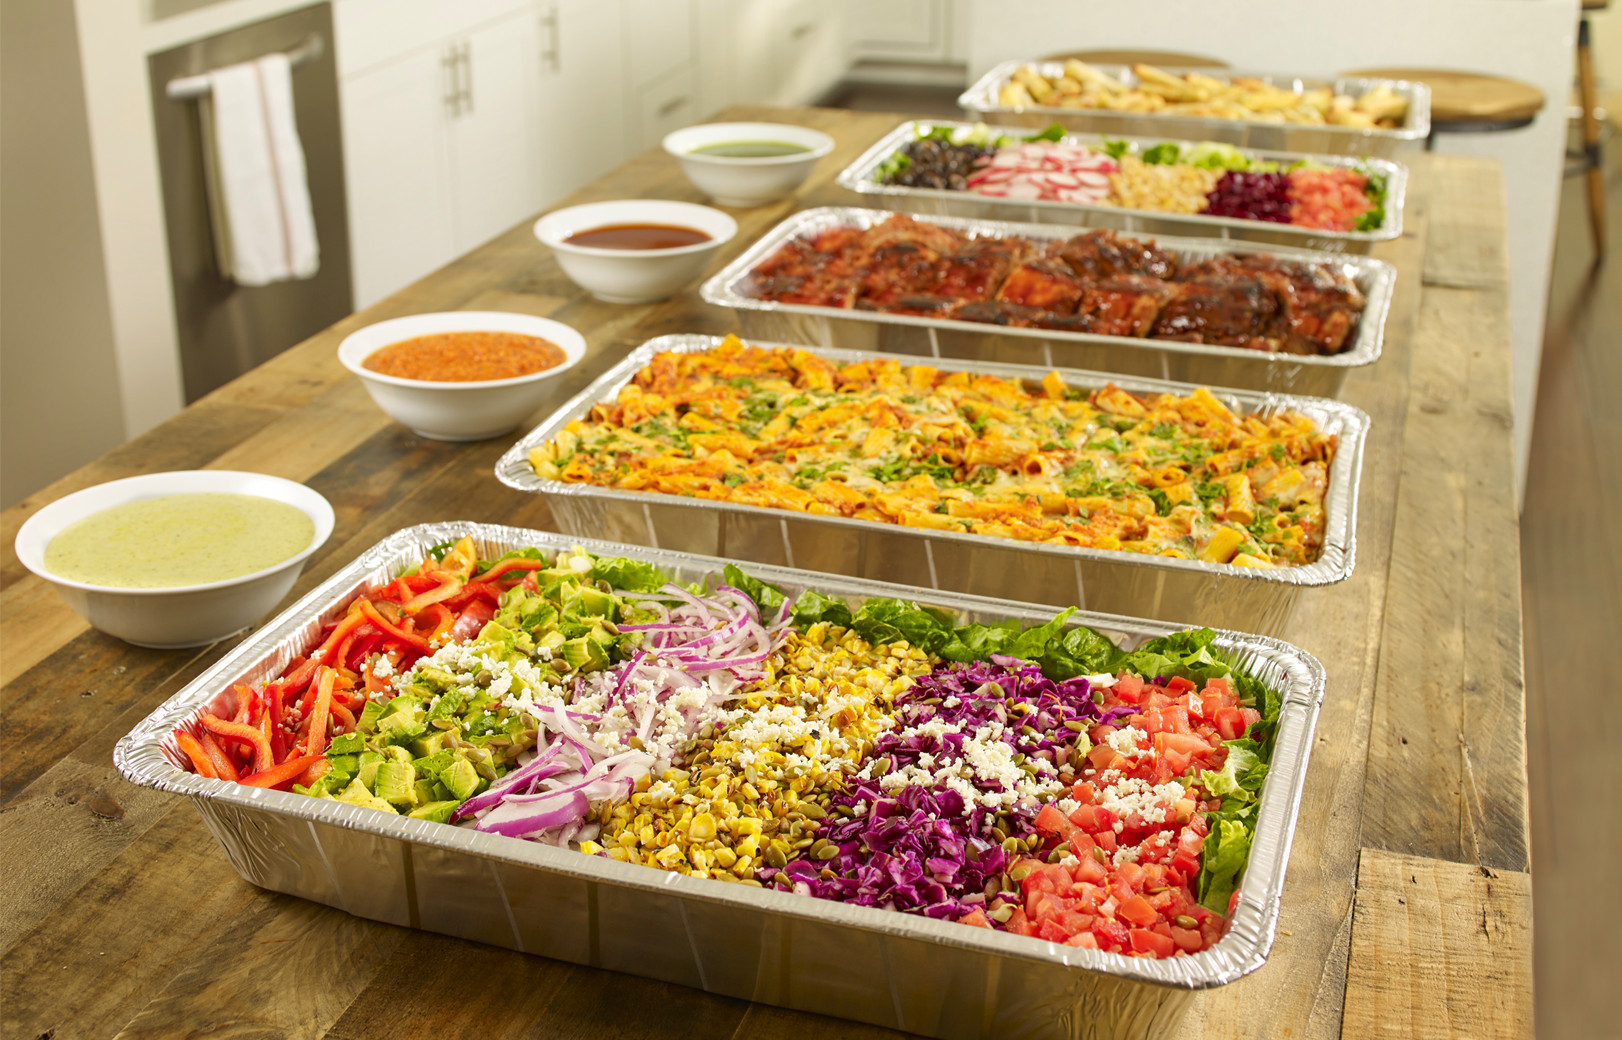 Cheap Catering Ideas For Graduation Party
 Cater YOUR Graduation Celebration